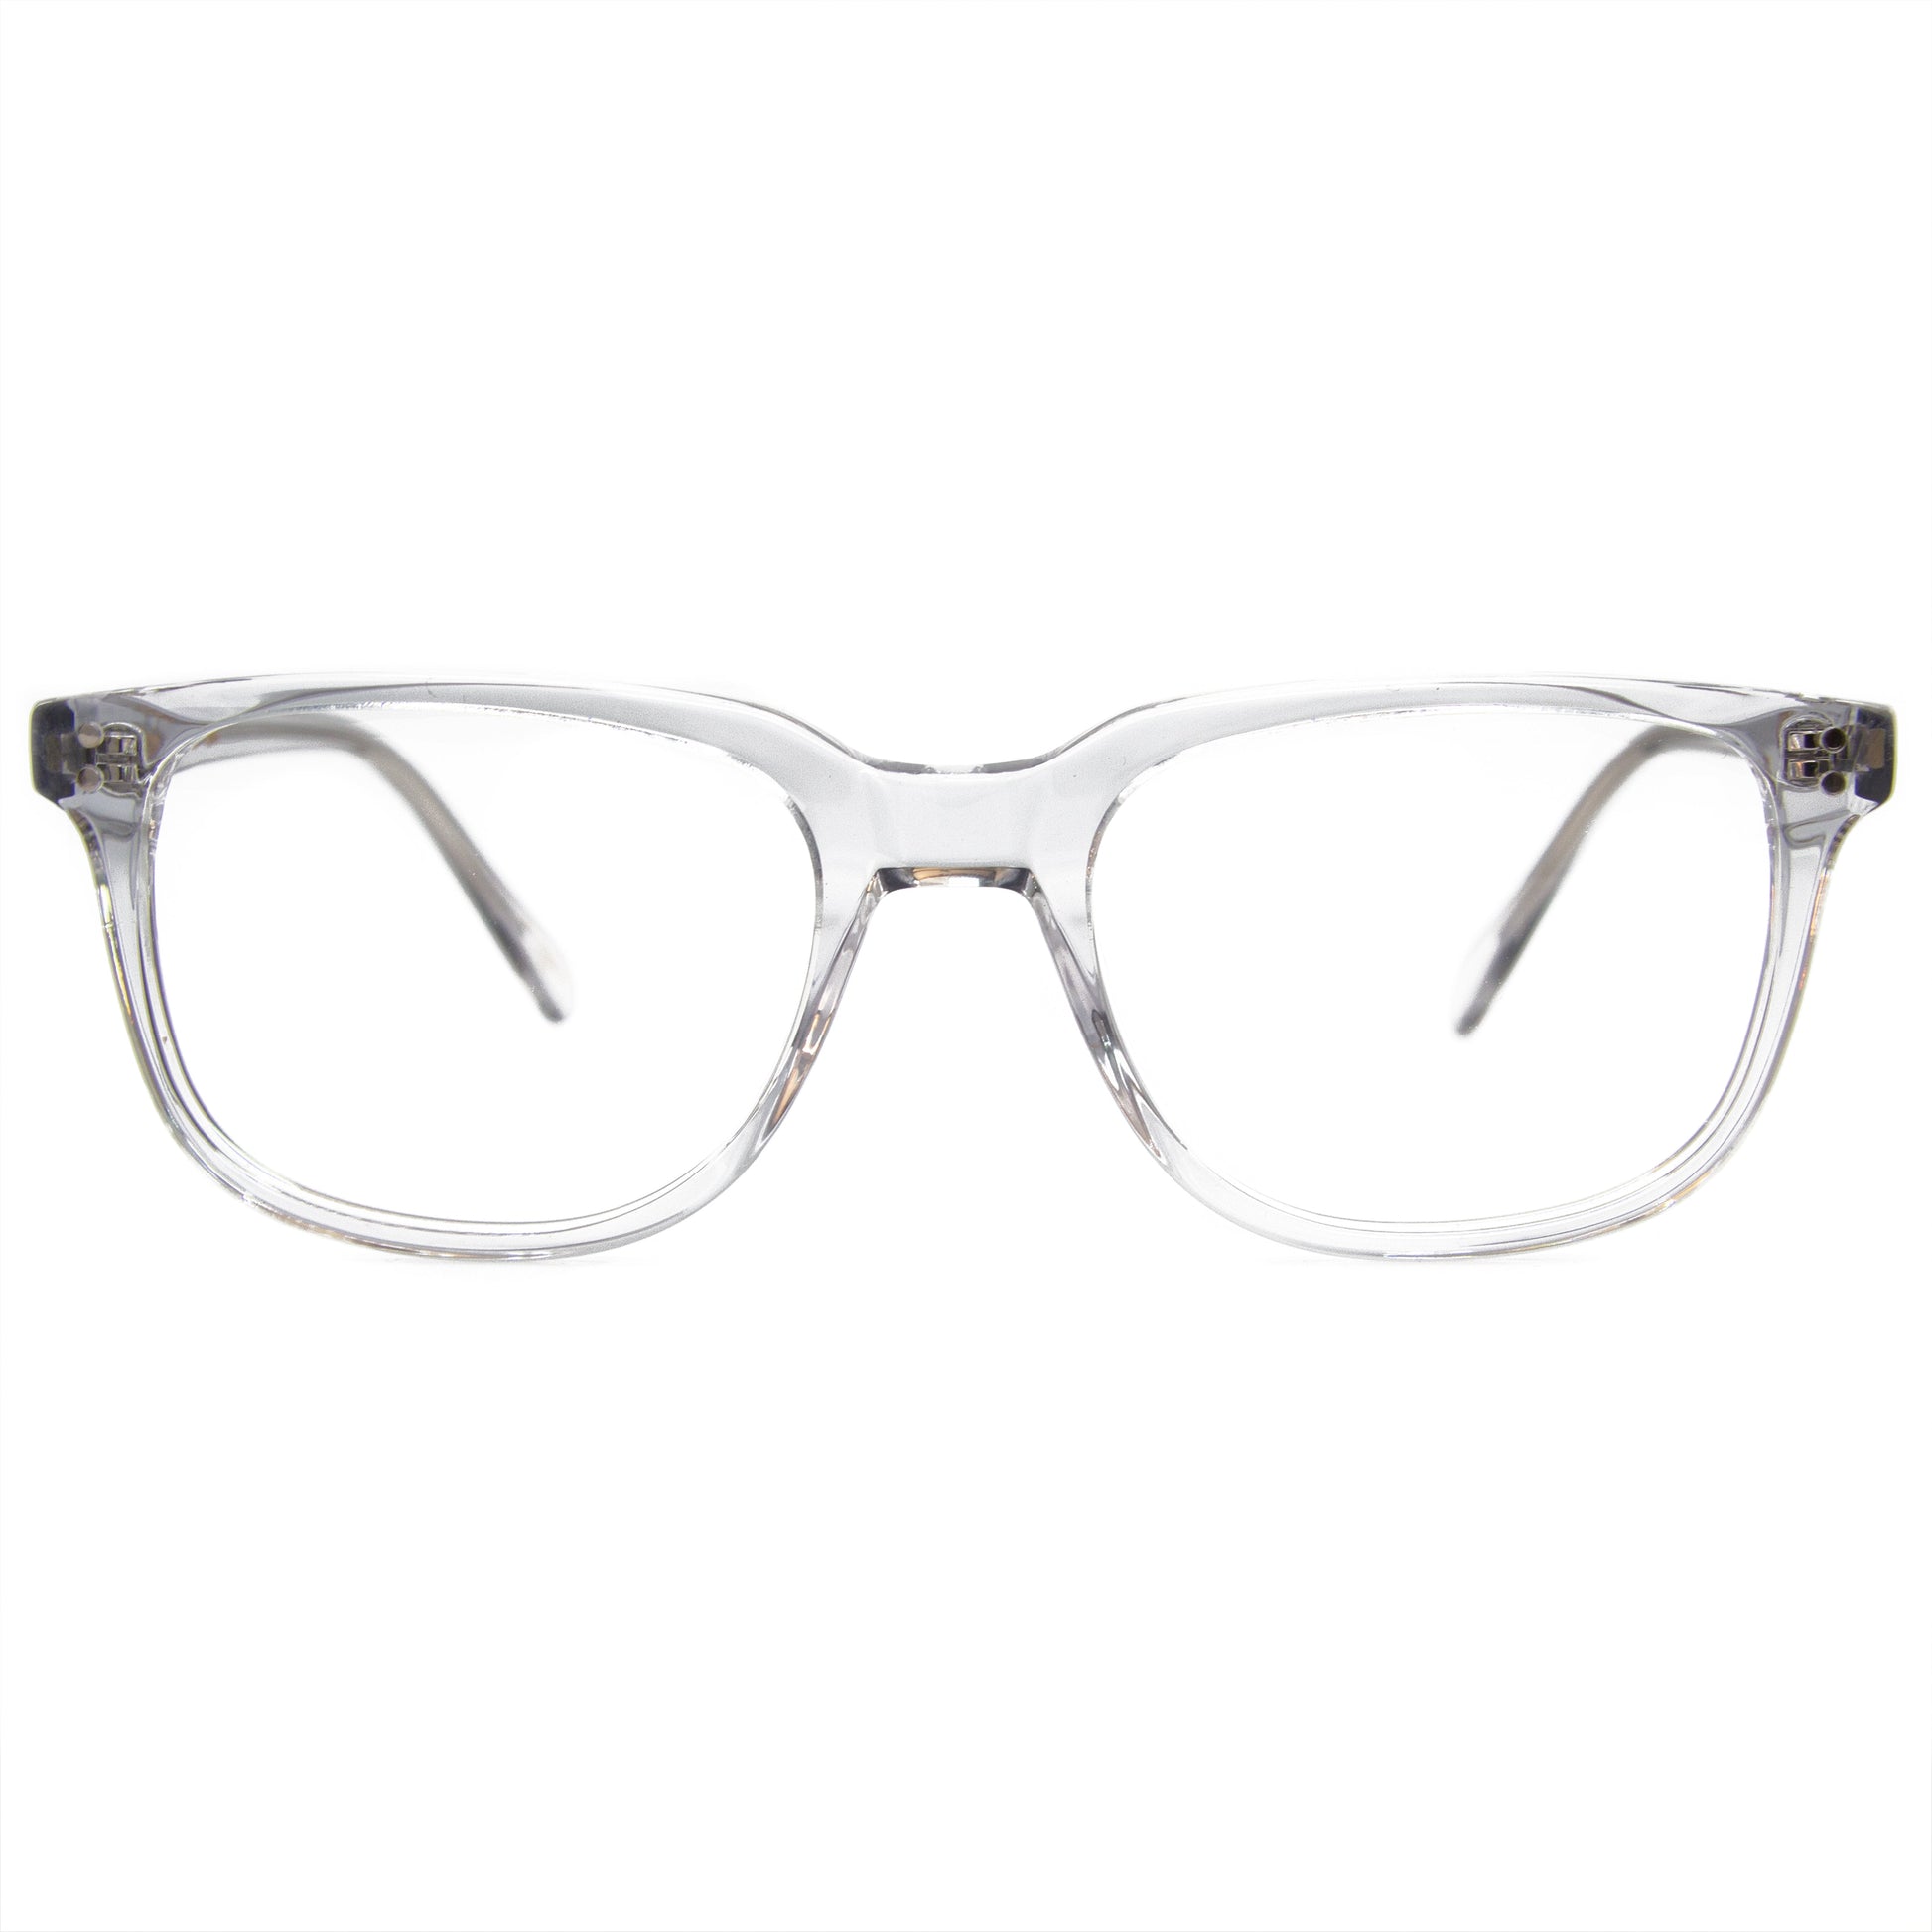 3 brothers - Theo - Crystal - Prescription Glasses